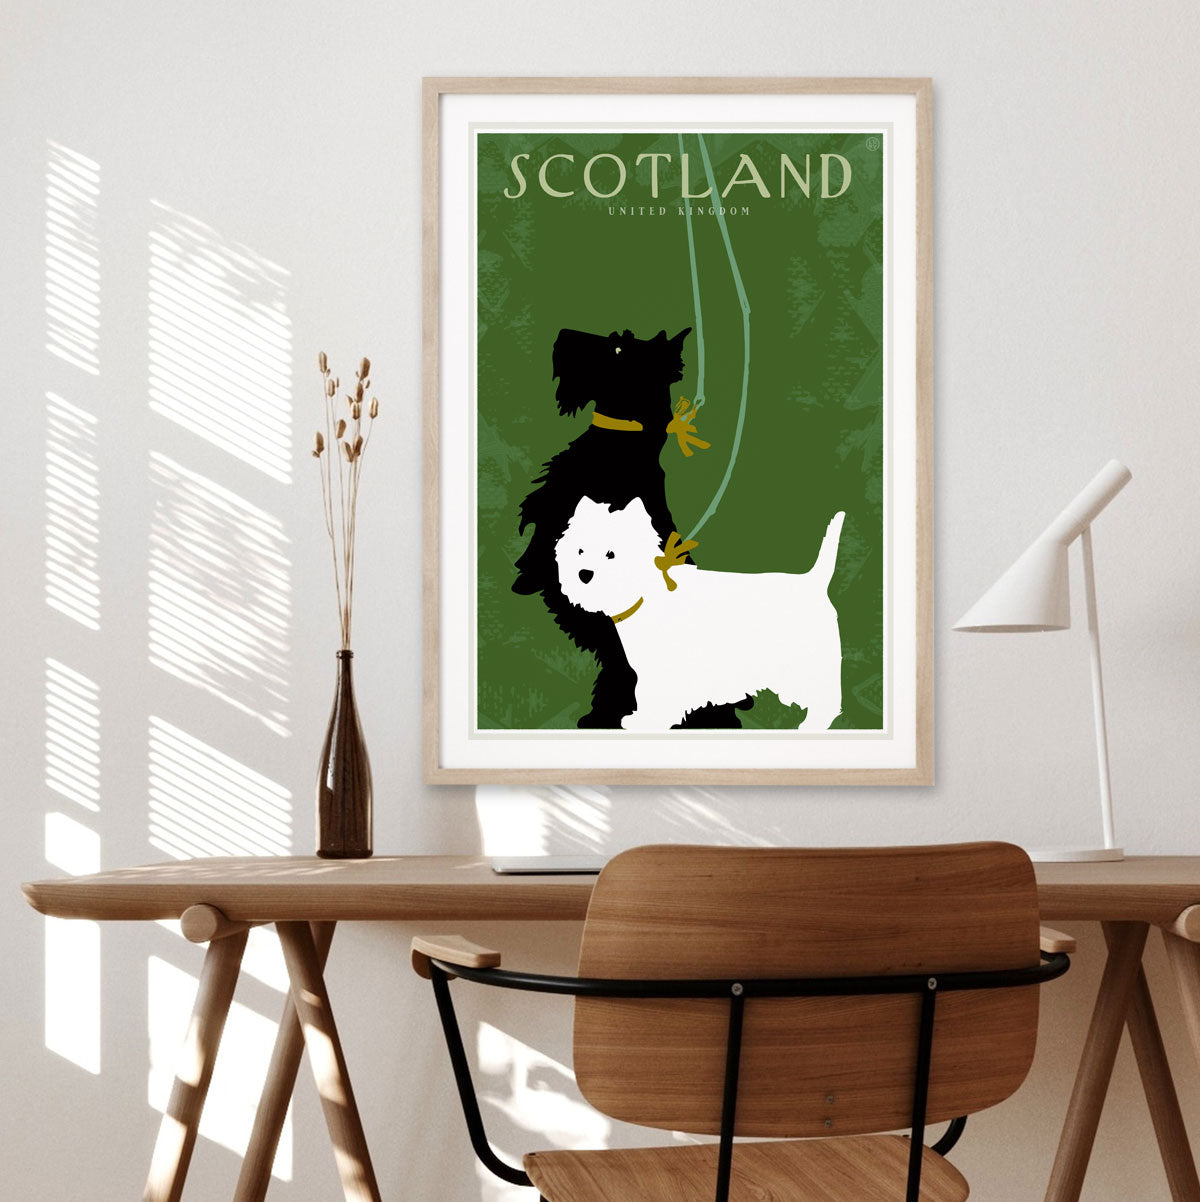 Scotland retro vintage travel print from Places We Luv